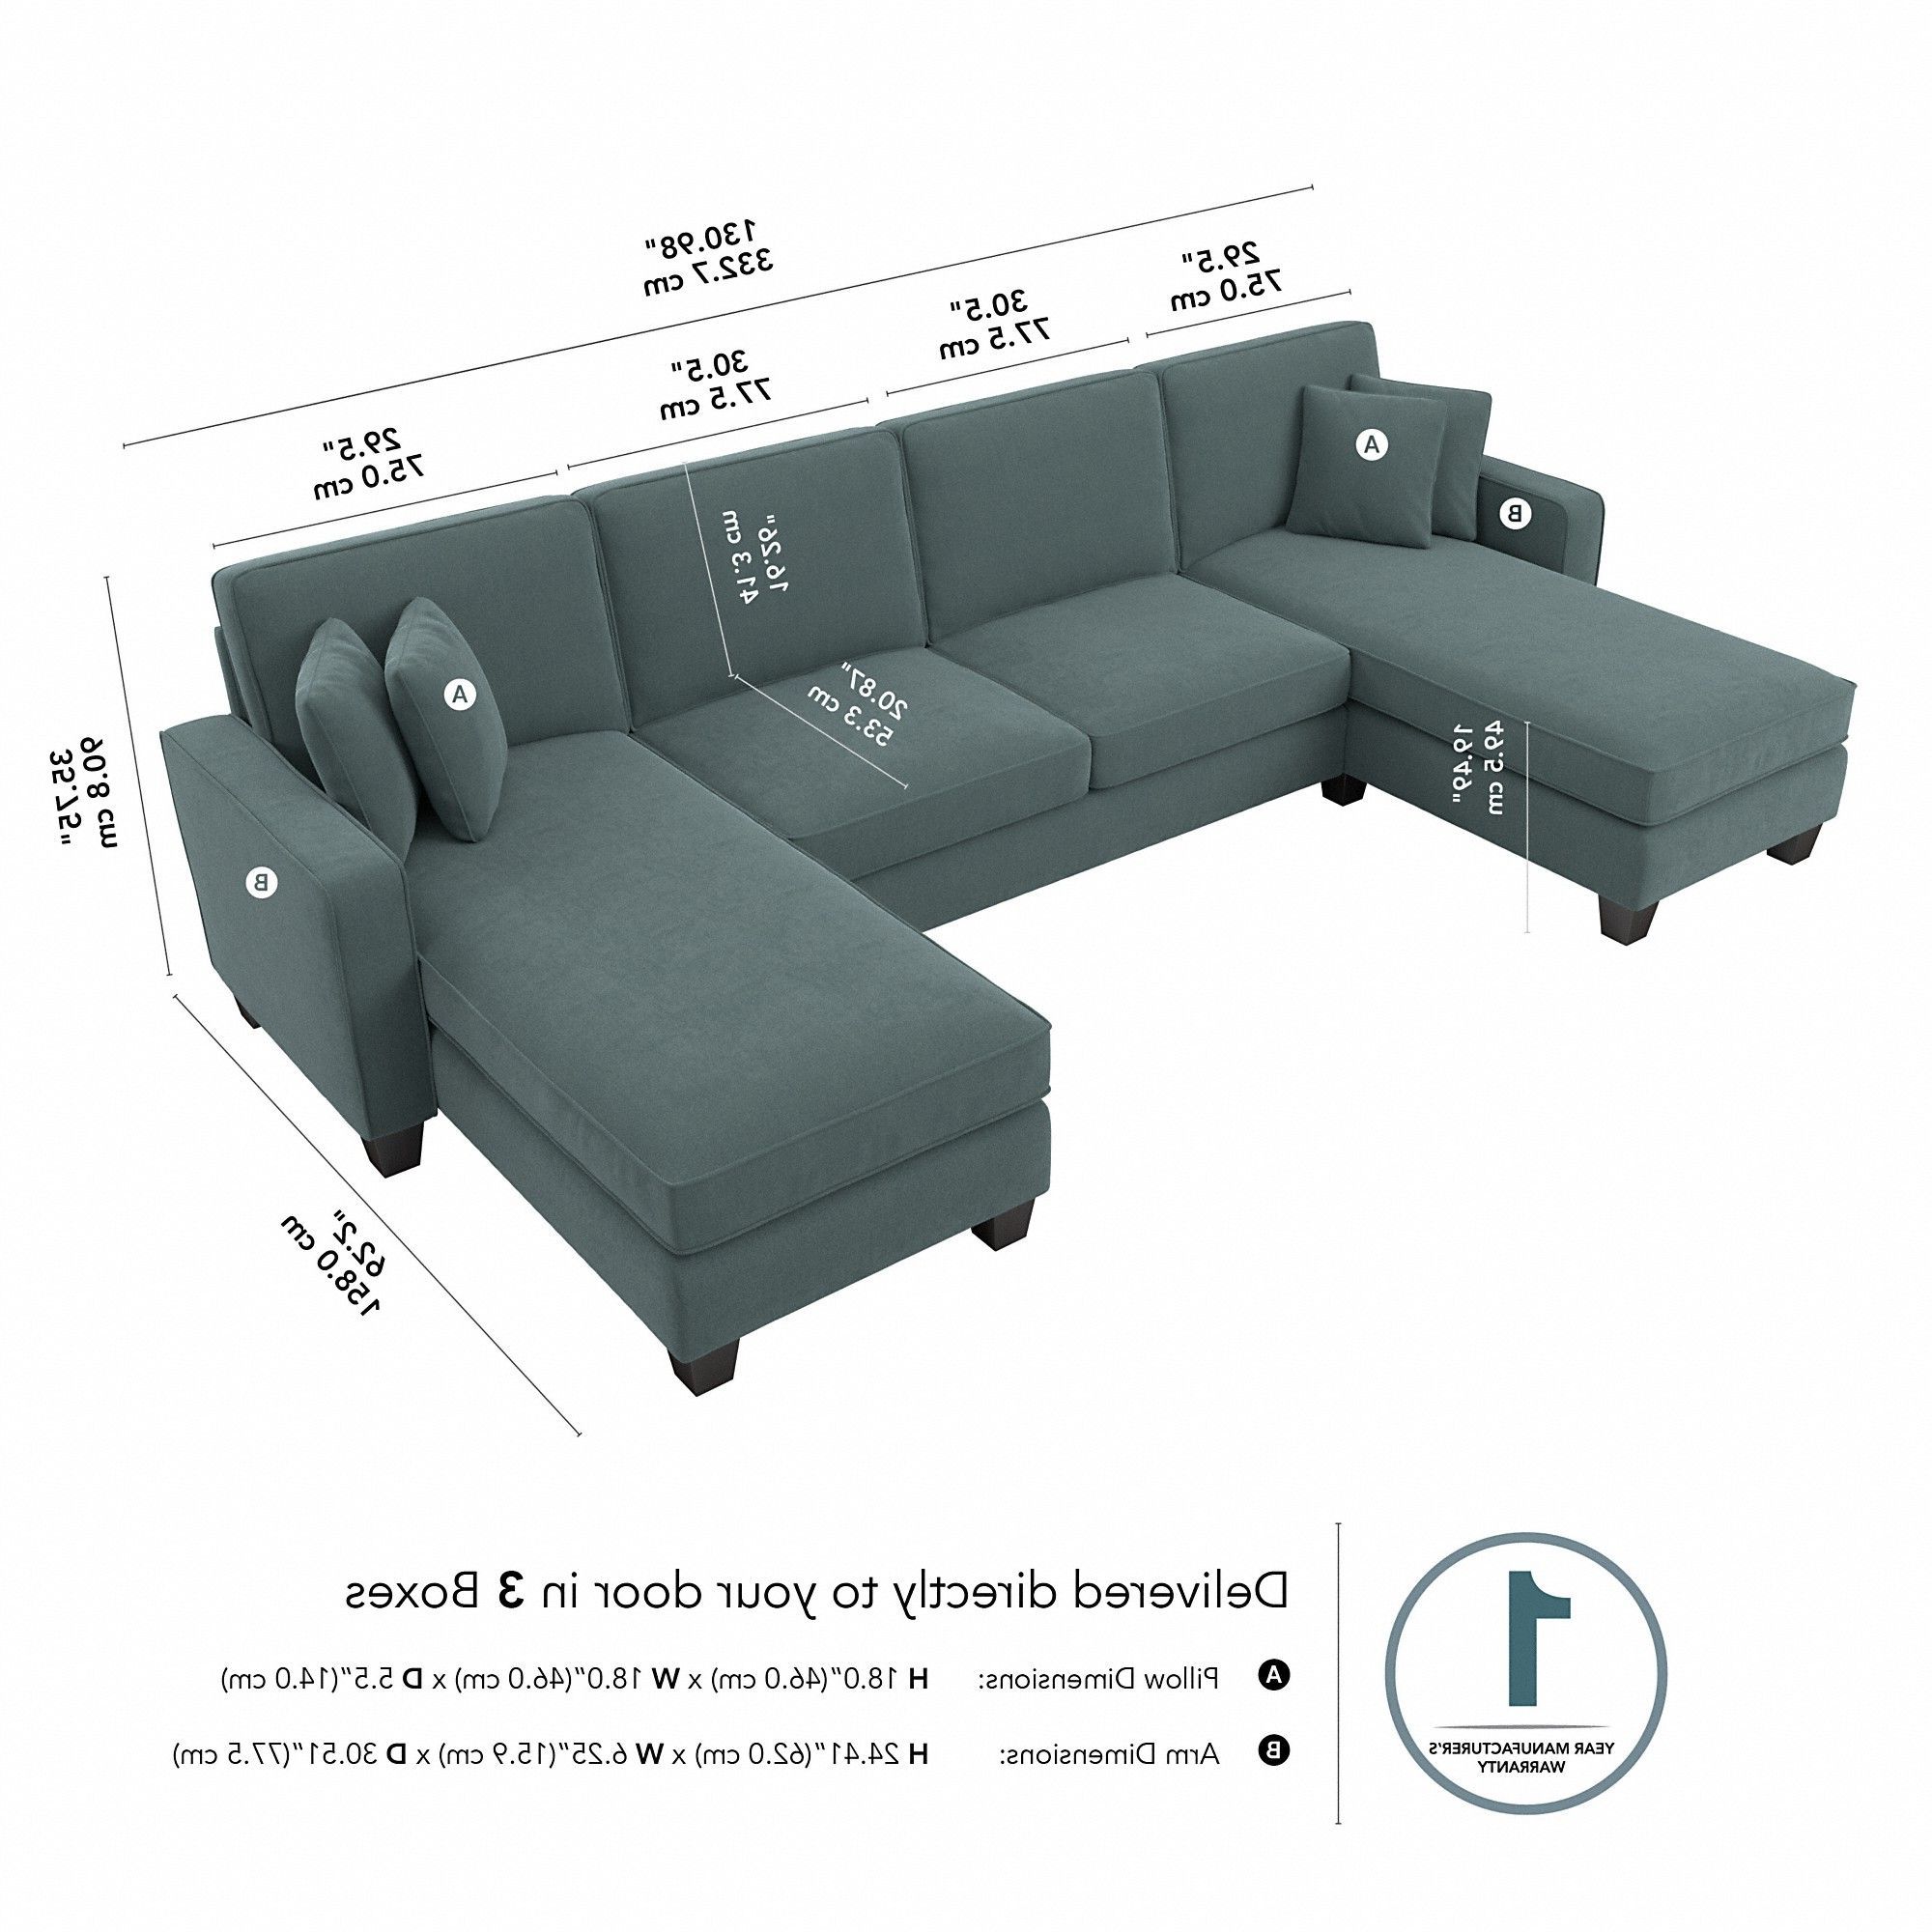 Bush Furniture Stockton 130W Sectional Couch With Double Throughout Famous 130" Stockton Sectional Couches With Double Chaise Lounge Herringbone Fabric (View 6 of 24)